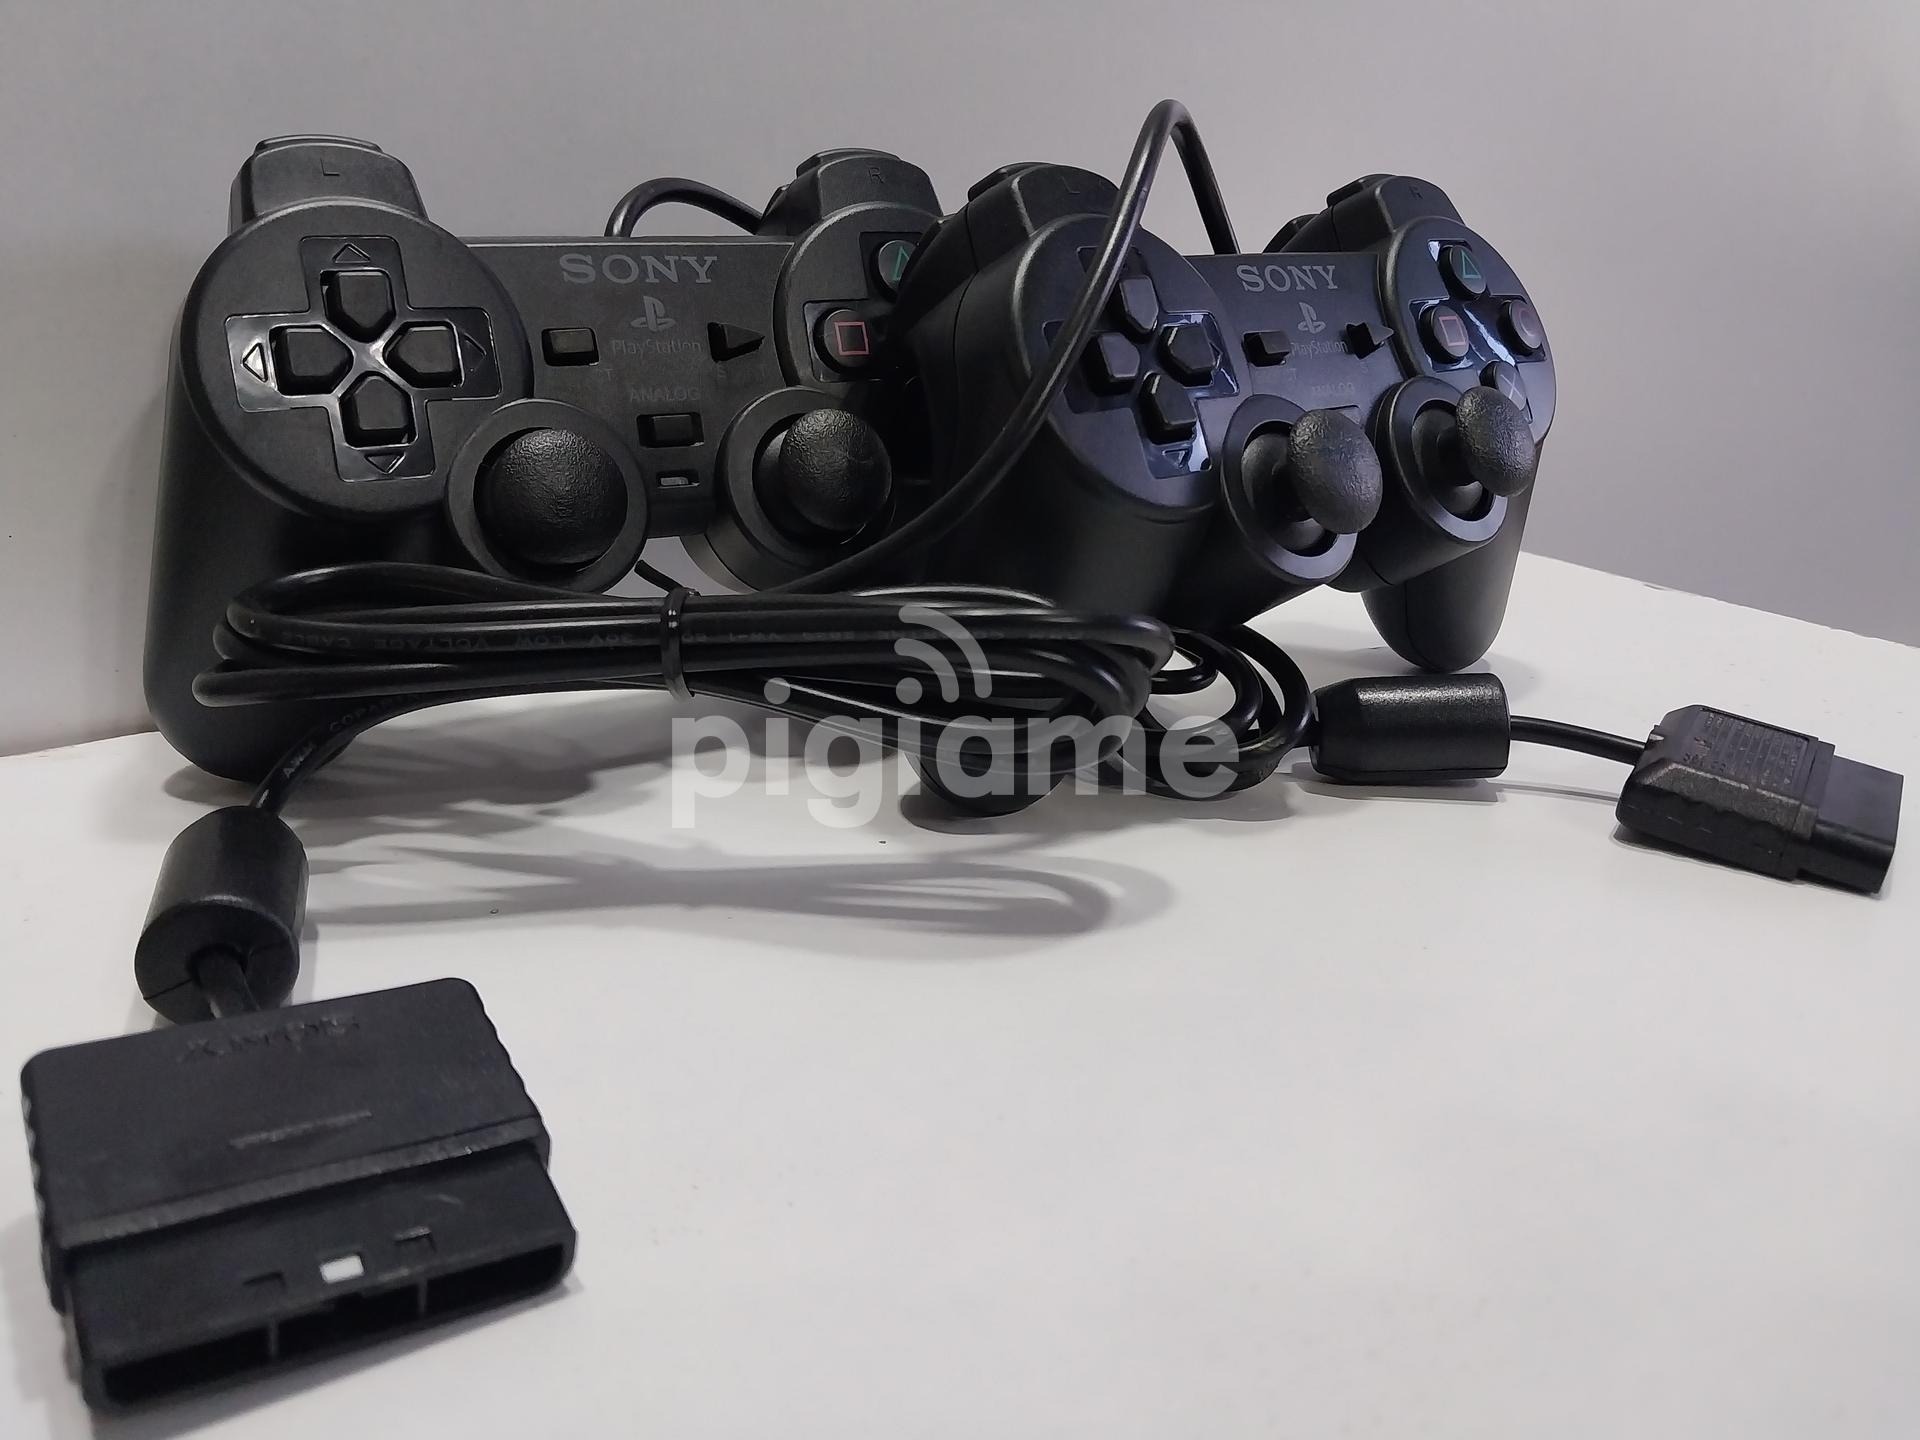 Ps2) Wired Controller For Sony Playstation 2 - Black in Nairobi CBD, Moi  Avenue